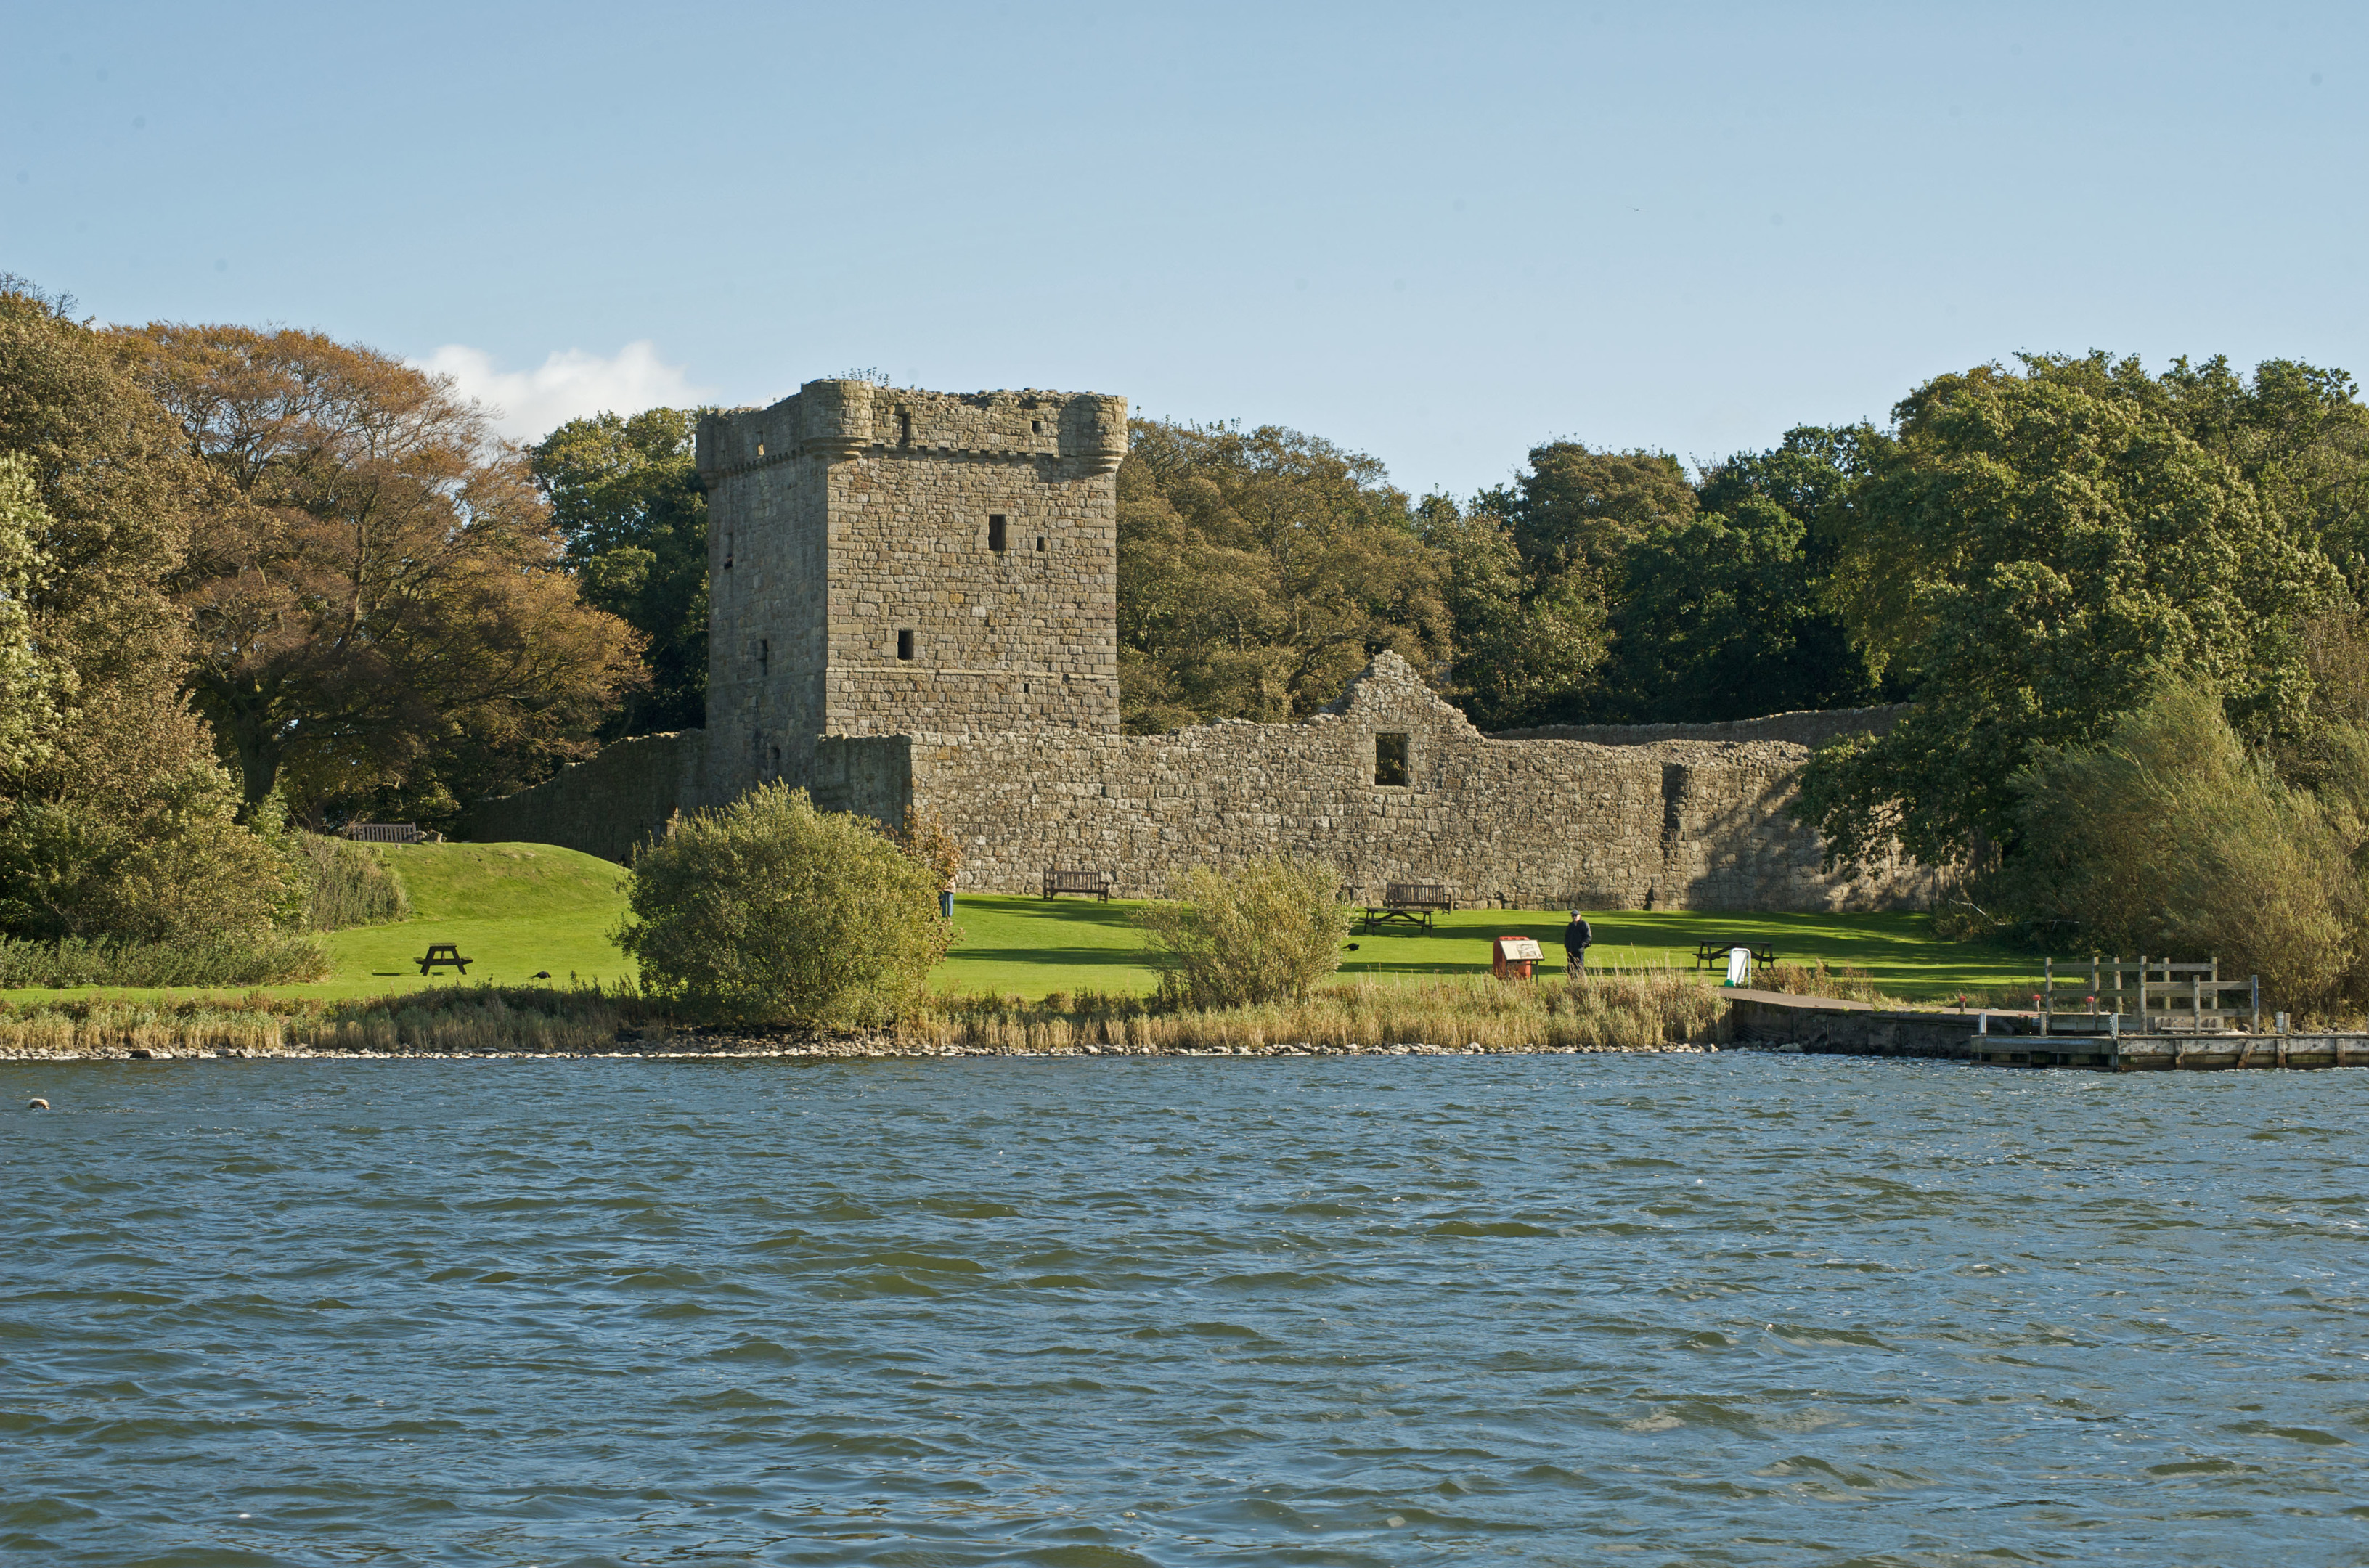 Mary Queen of Scots was imprisoned at Loch Leven Castle in 1567. Image: Historic Scotland.